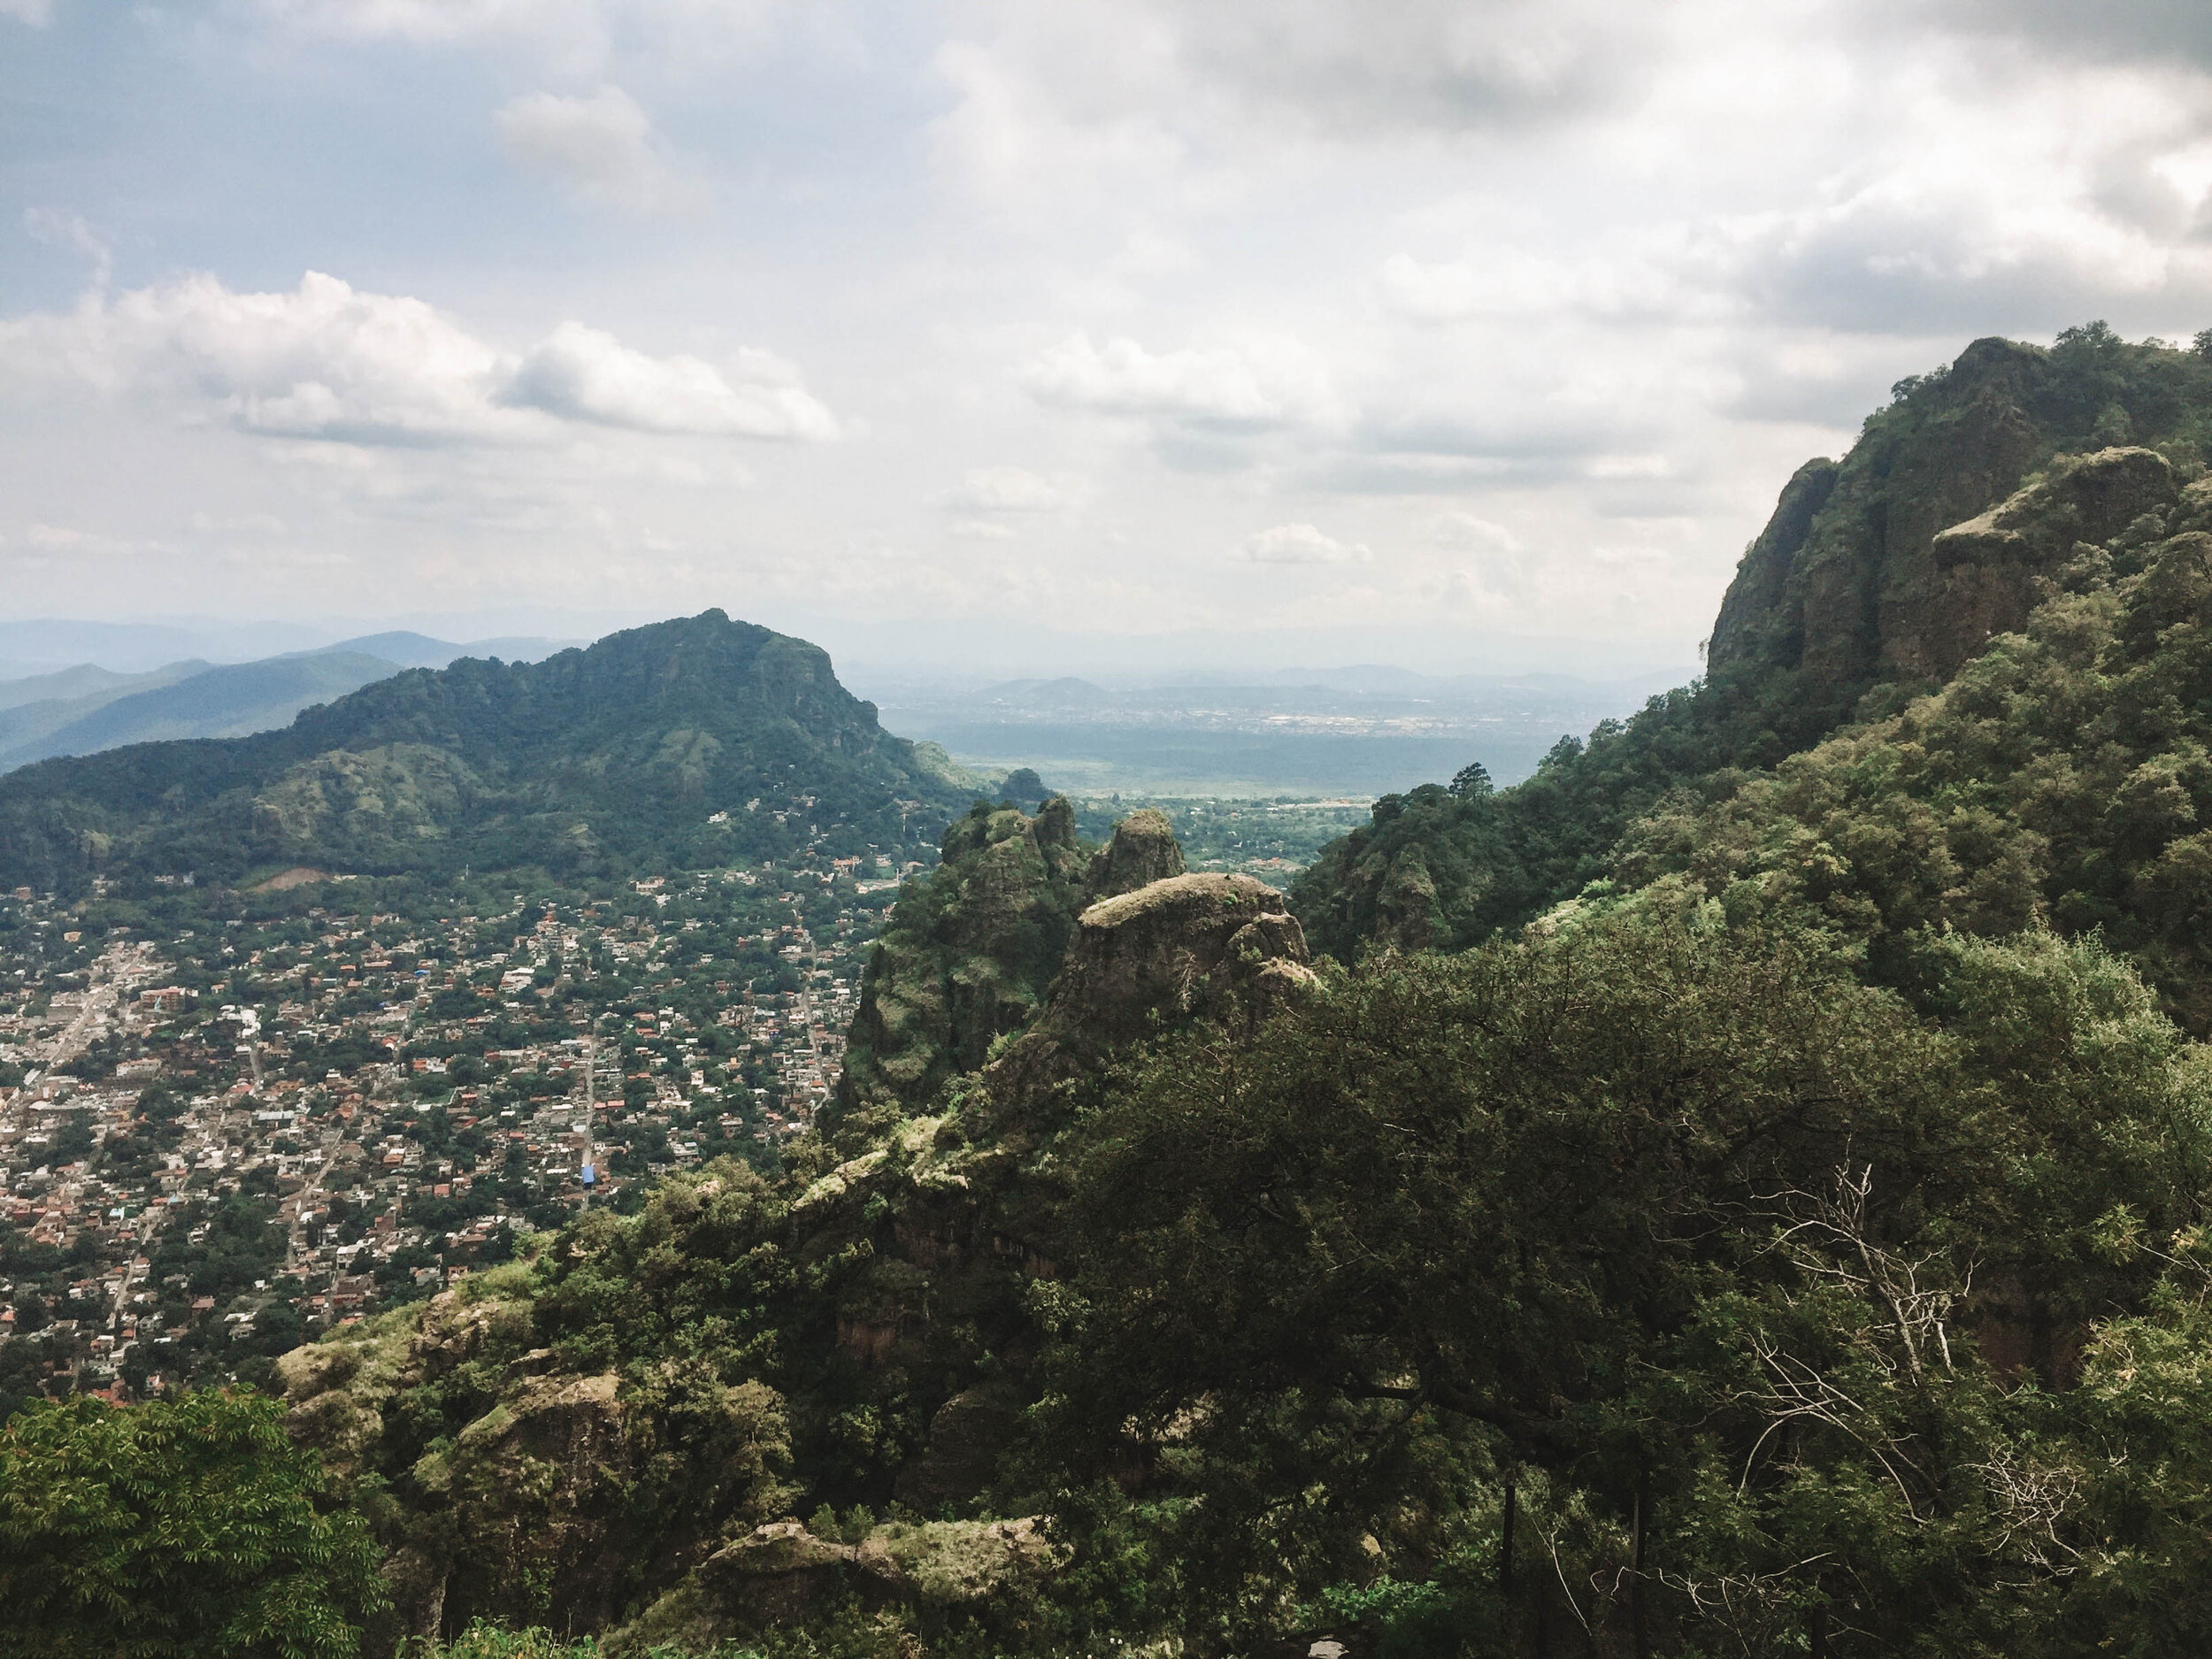 View of Tepoztlán from the top of El Tepozteco